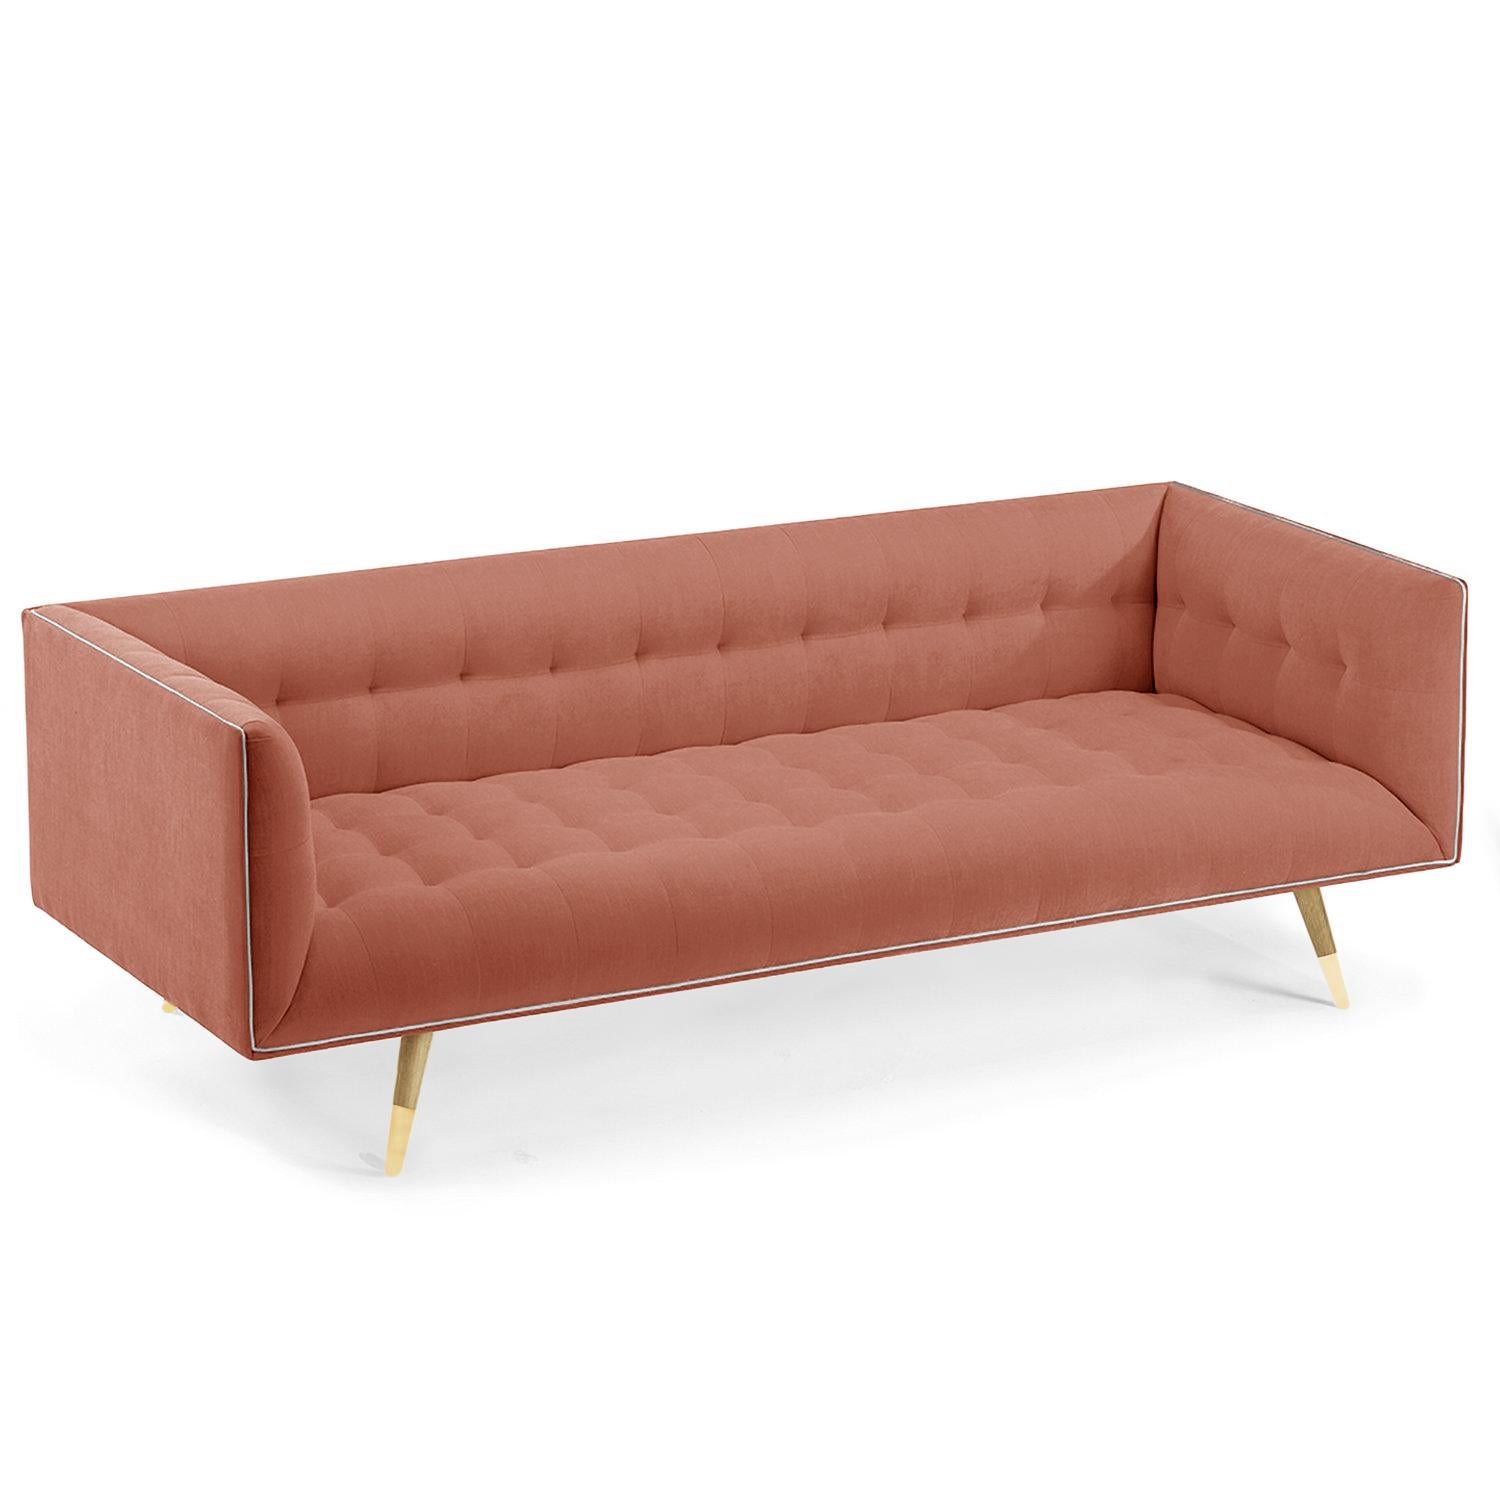 Dust Sofa, Medium with Natural Light Oak - Polished Brass In New Condition For Sale In Brooklyn, NY